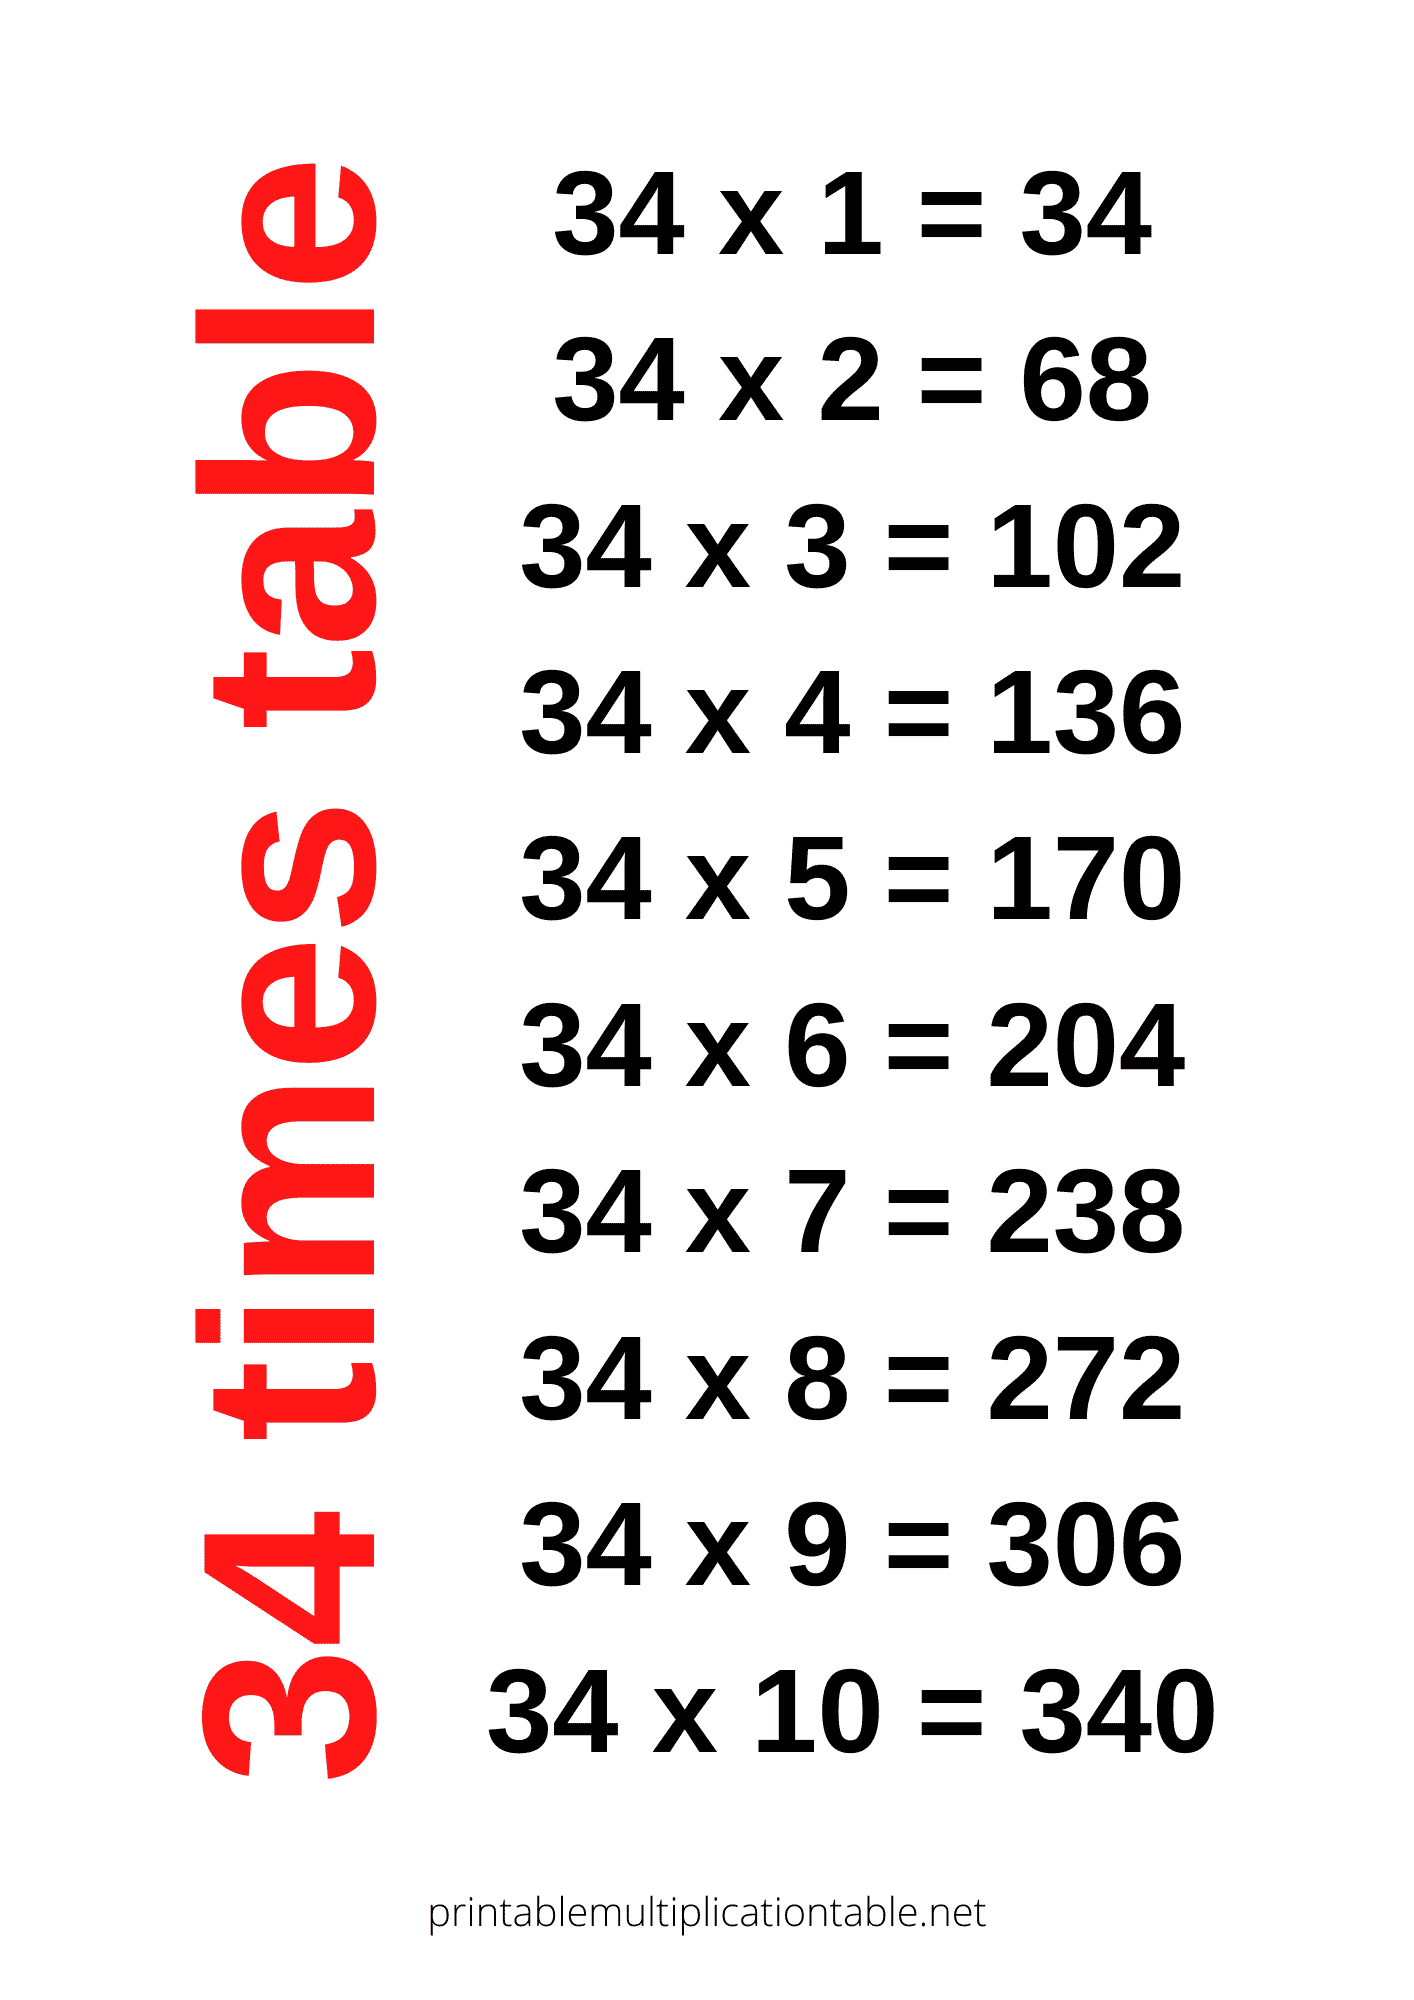 34 times table chart